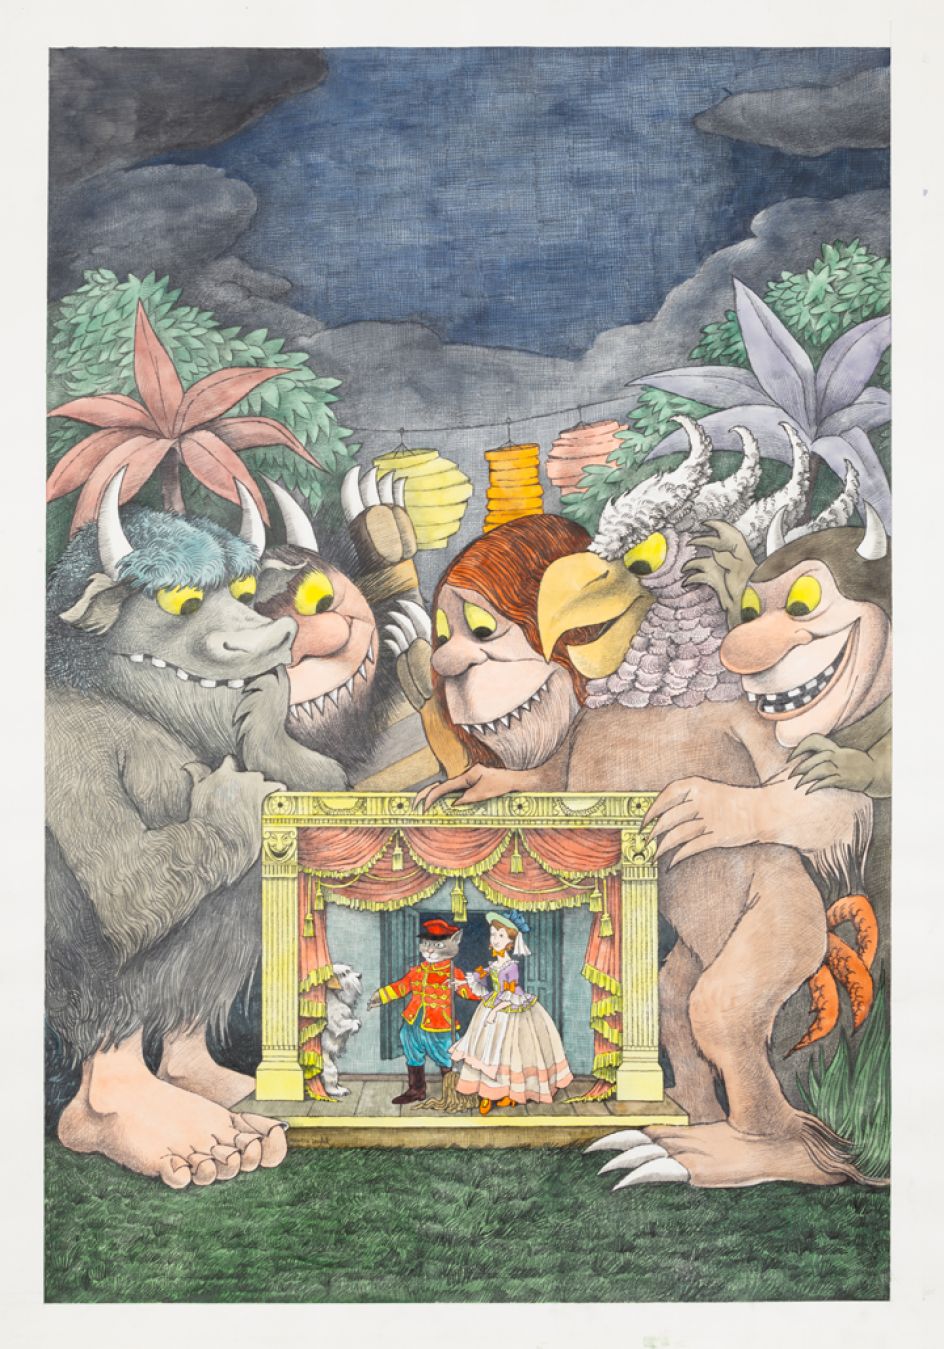 Maurice Sendak, Design for the Poster of Where the Wild Things Are and Higglety Pigglety Pop! Opera, Glyndebourne Production, 1985, watercolor on paper, 33 ½ x 23 ½” ©The Maurice Sendak Foundation